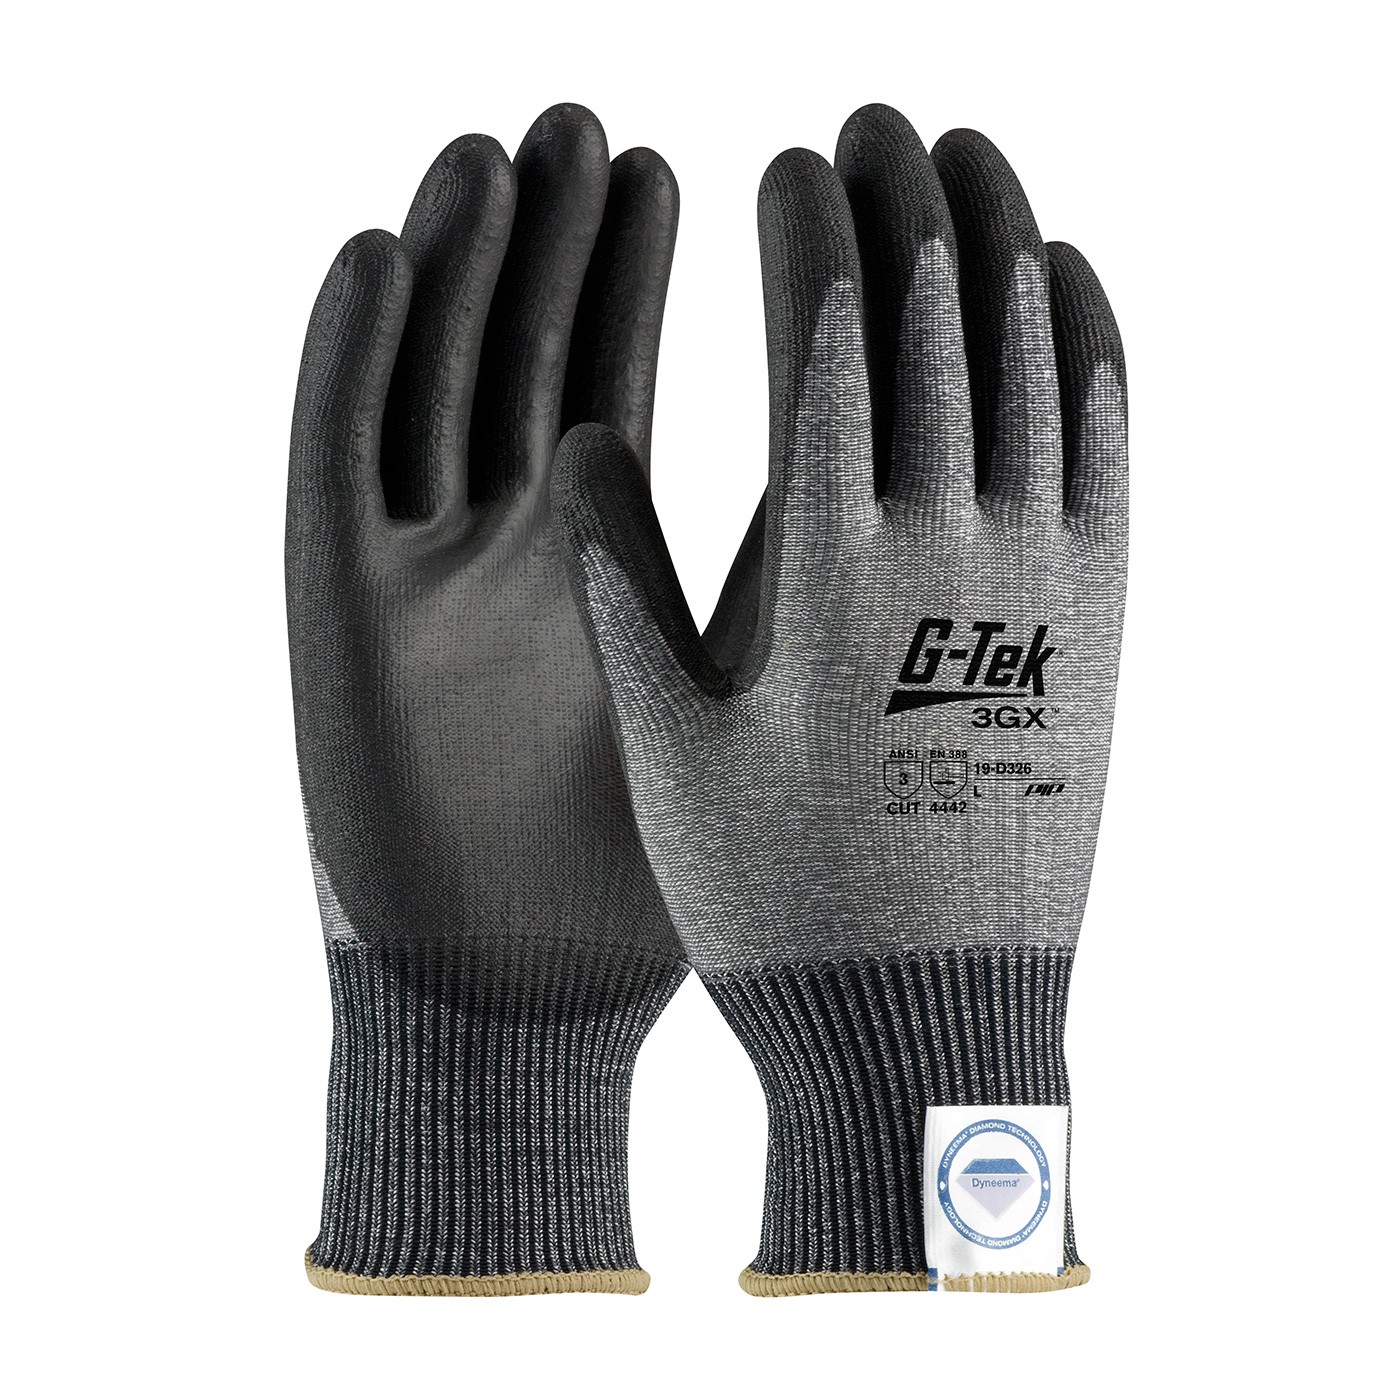 G-Tek® 3GX® Seamless Knit Dyneema® Diamond Blended Glove with Polyurethane Coated Smooth Grip on Palm & Fingers  (#19-D326)